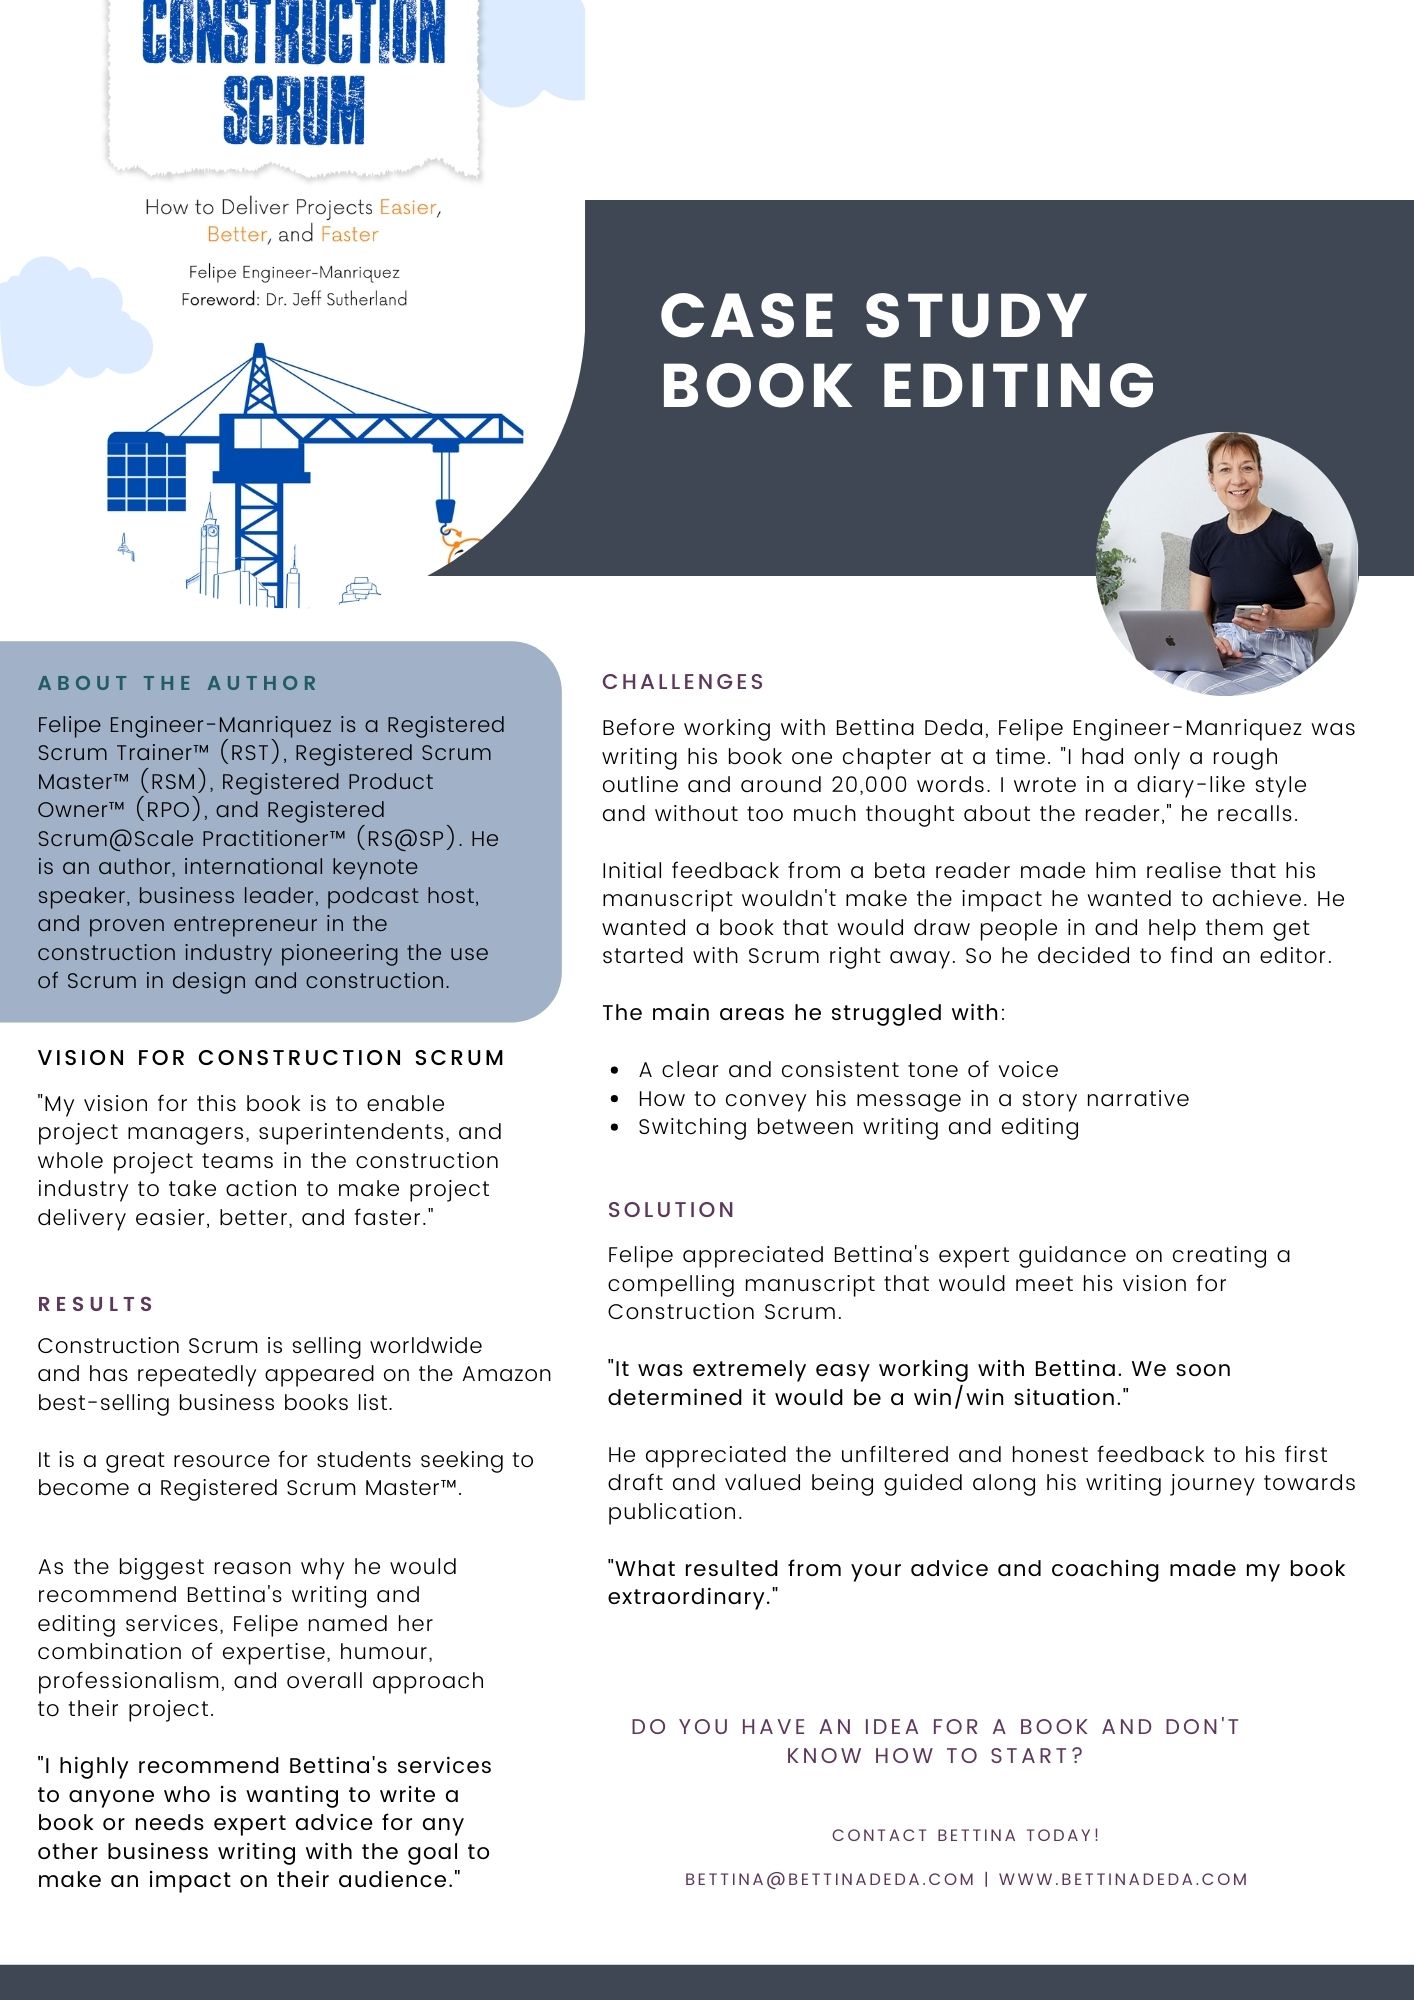 Editing services, Case study business book editing, construction scrum by Felipe Engineer-Manriquez, editing, ghostwriting